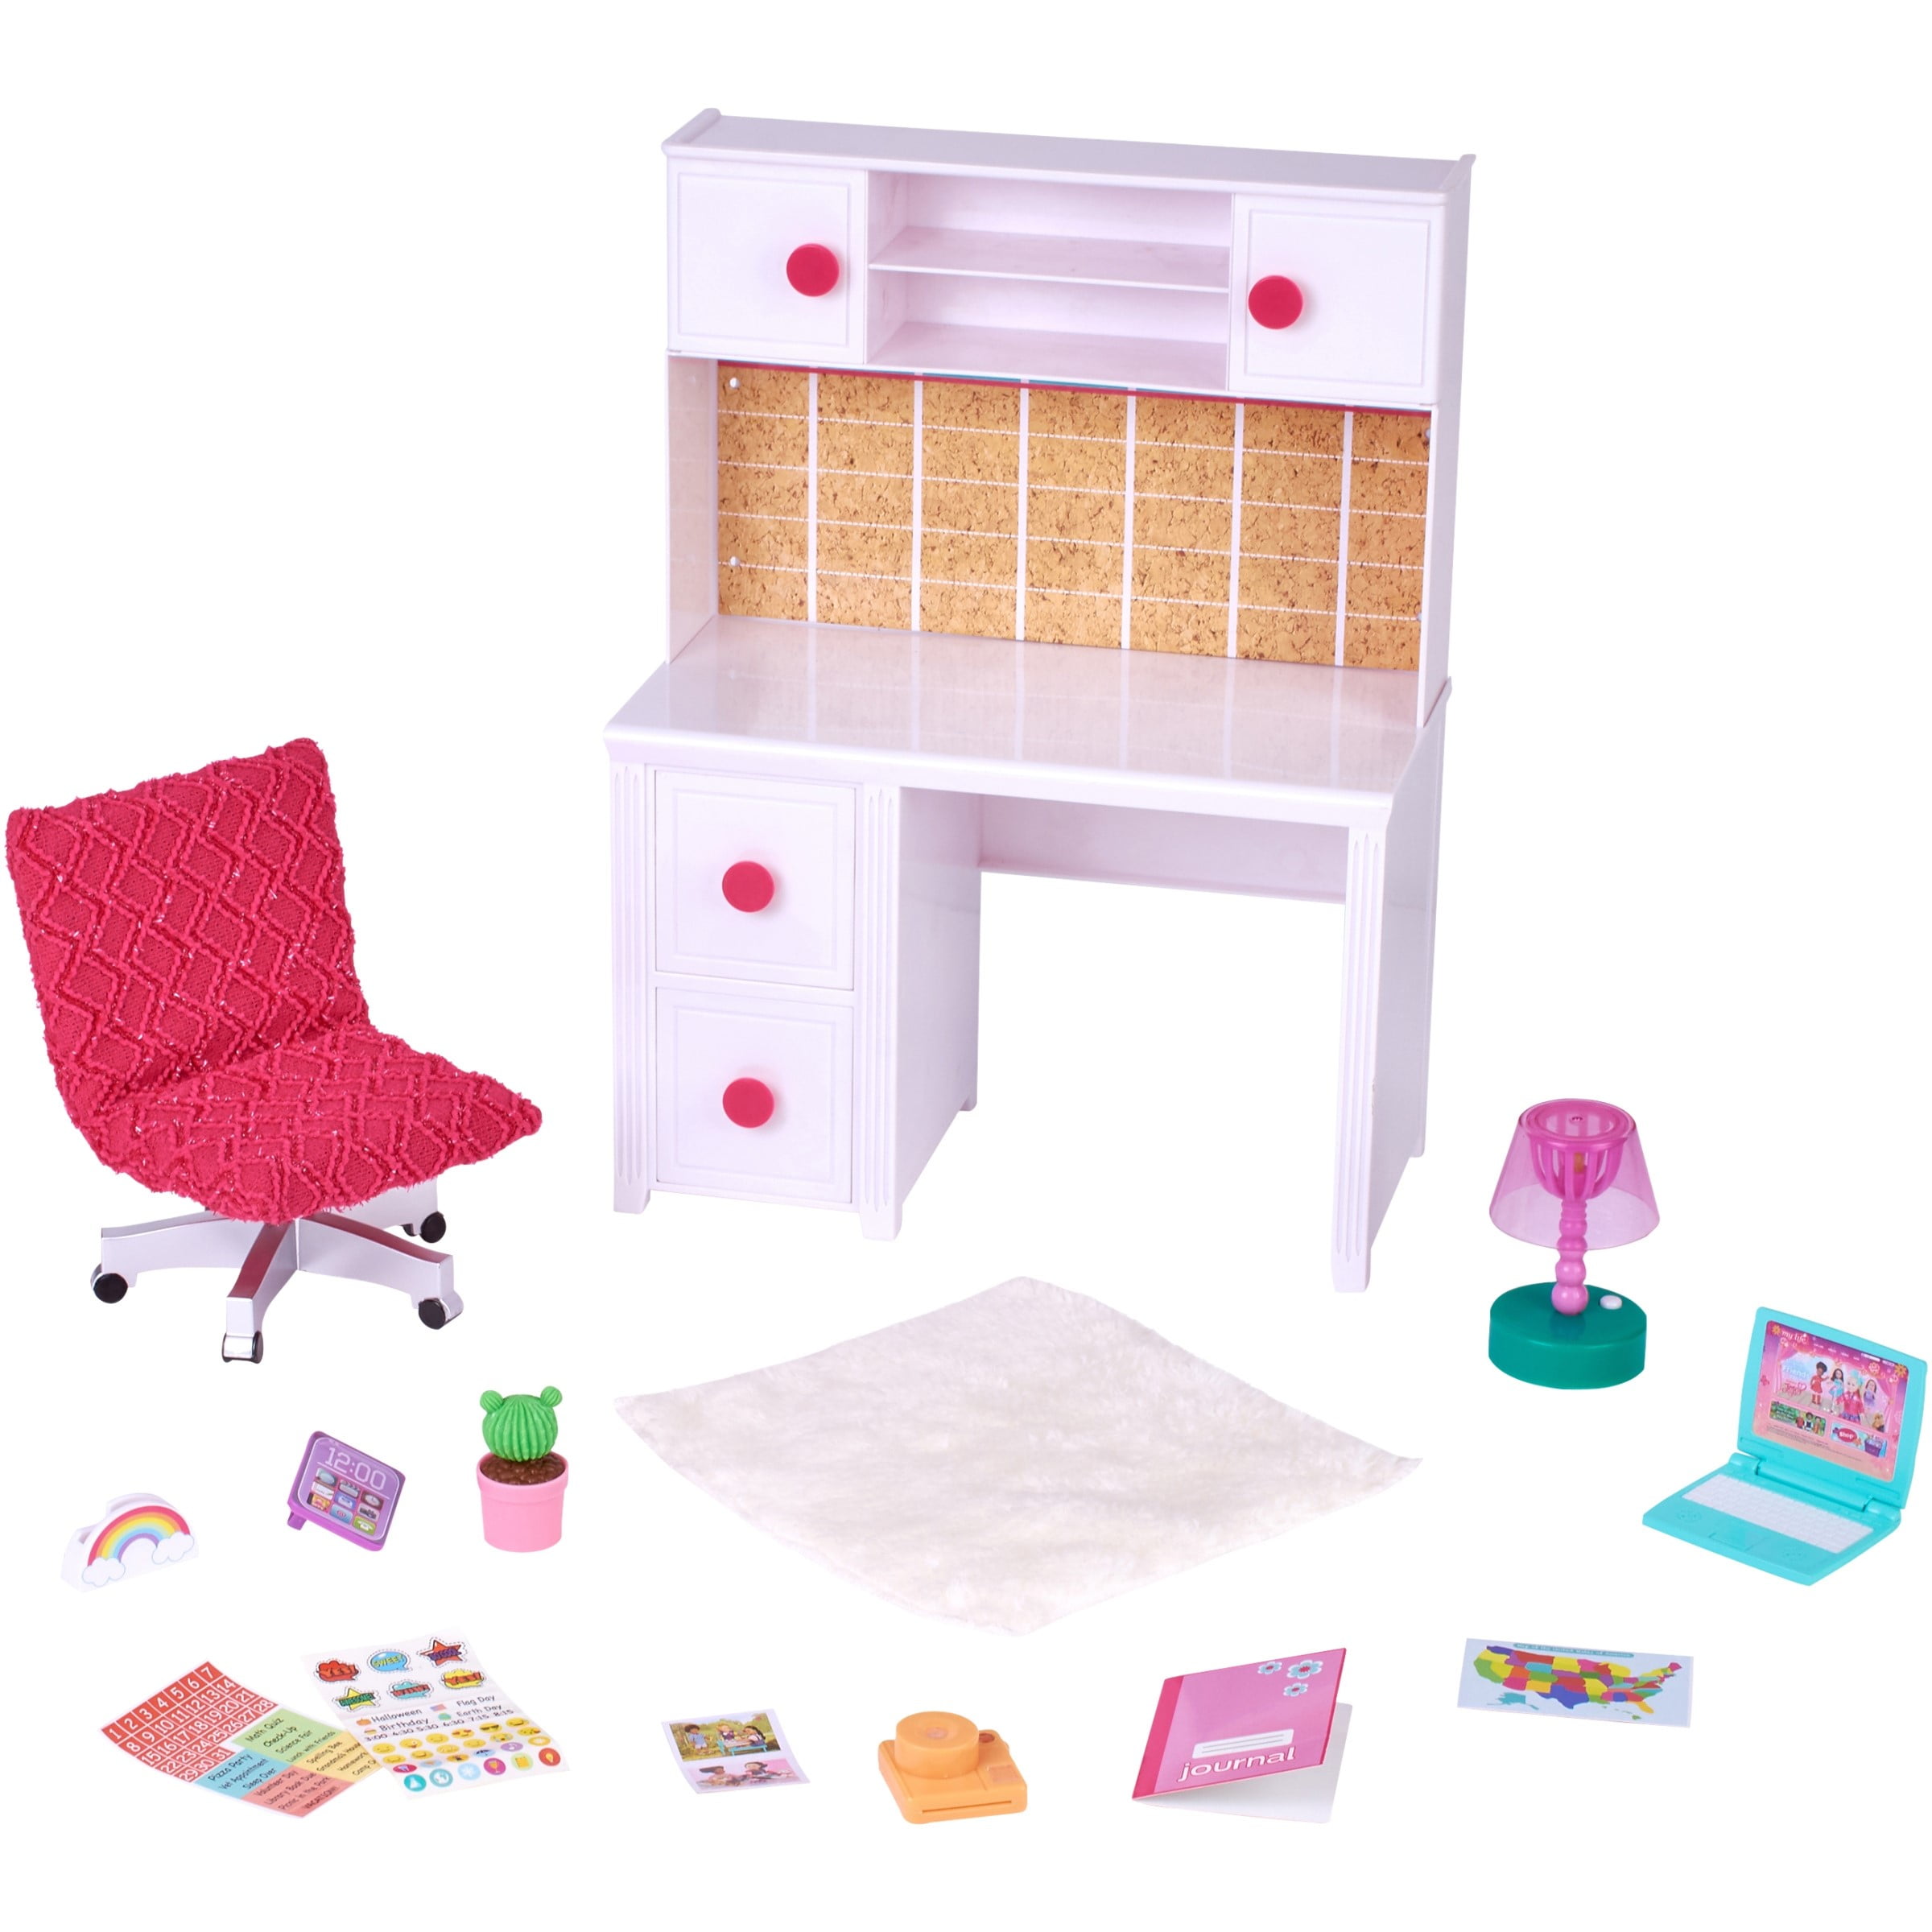 My Life As 18 Inch Desk Play Set With Multiple Accessories